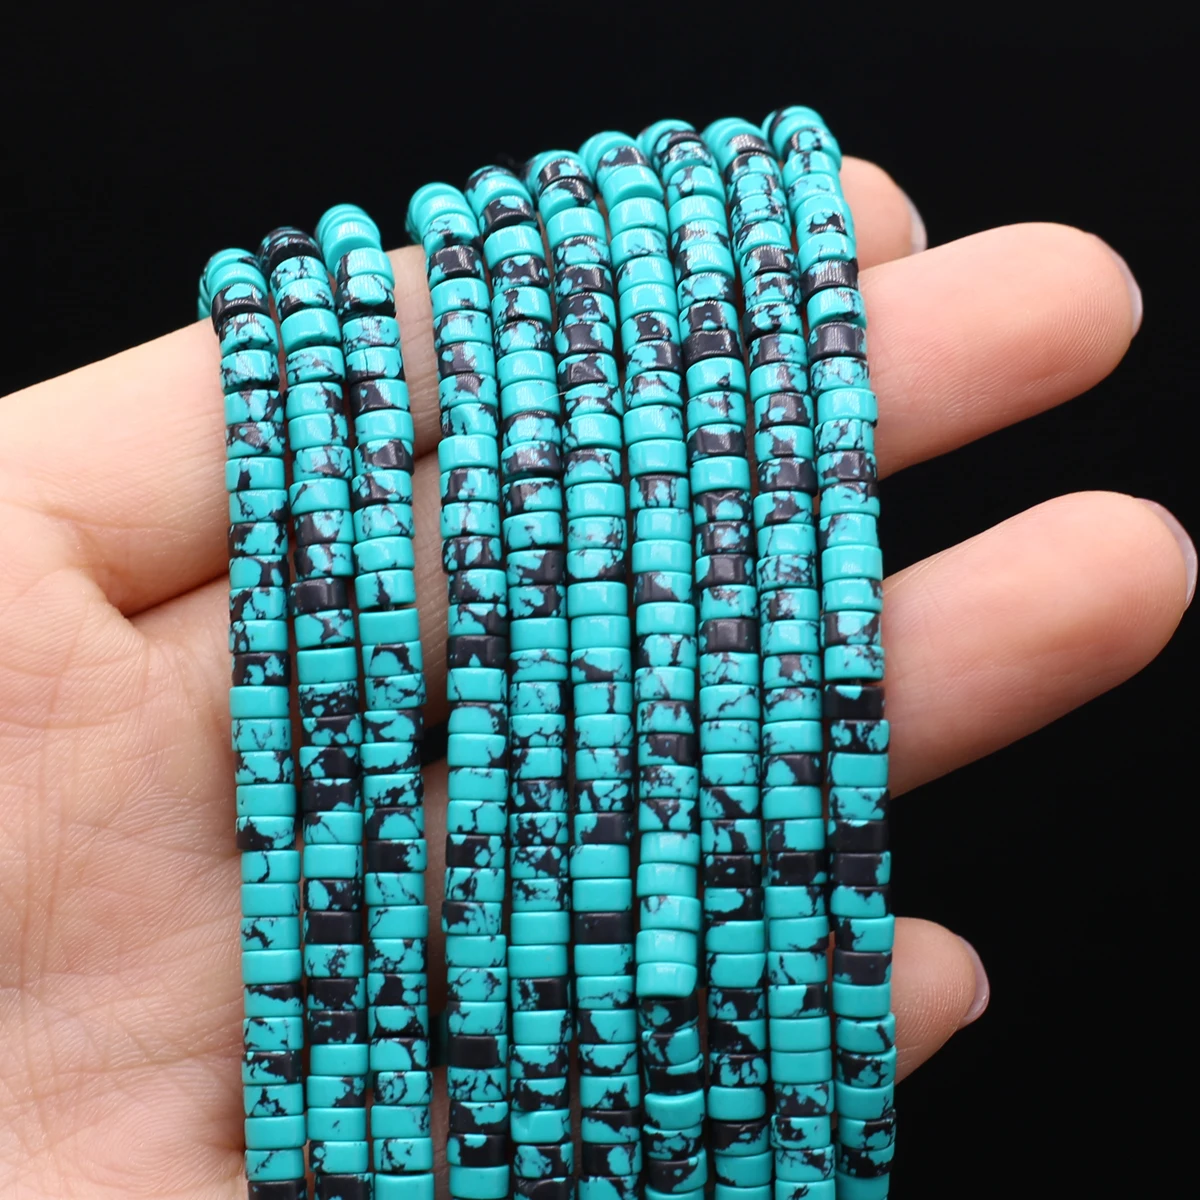 

1pcs Natural Stone Round Flat Slices Beads Blue Turquoise Ornaments Making DIY Exquisite Necklaces Bracelets Jewelry Gift 2x4mm